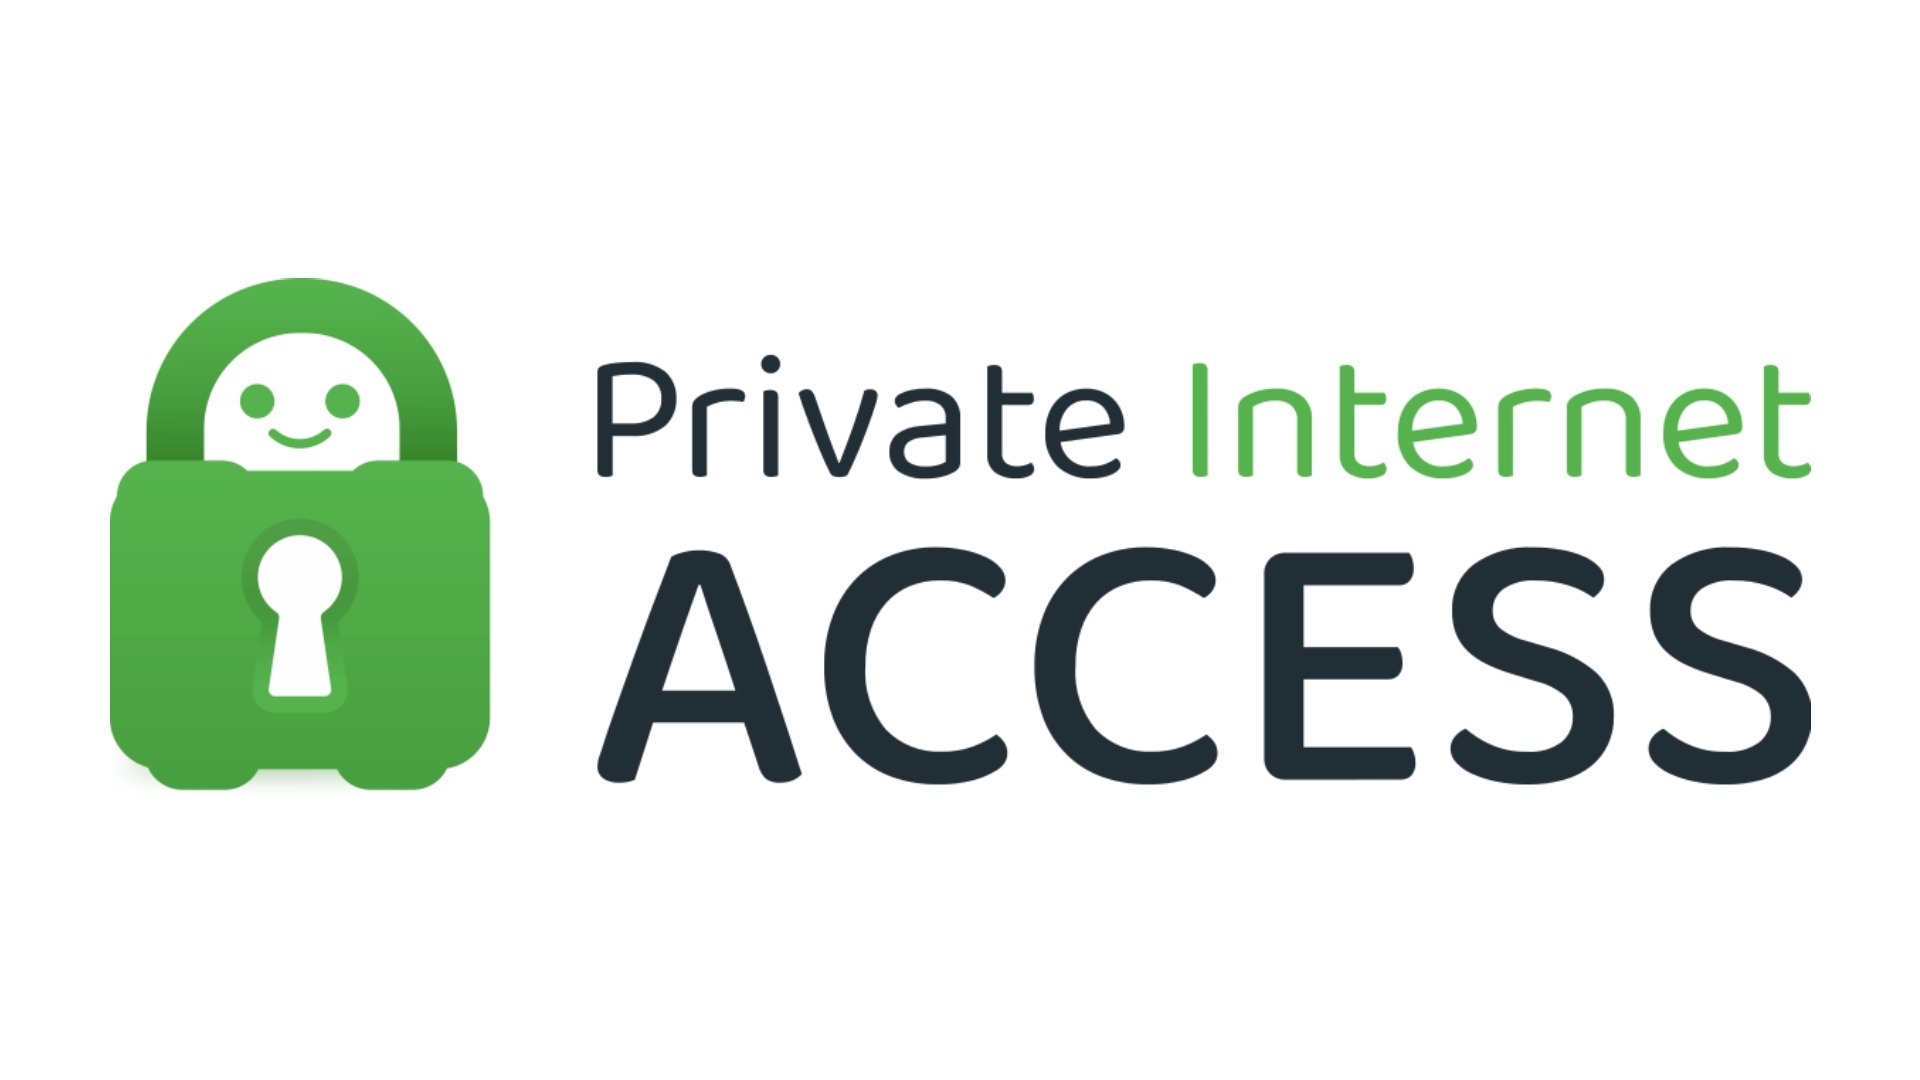 VPN costs for Private Internet Access. Image shows the company logo.